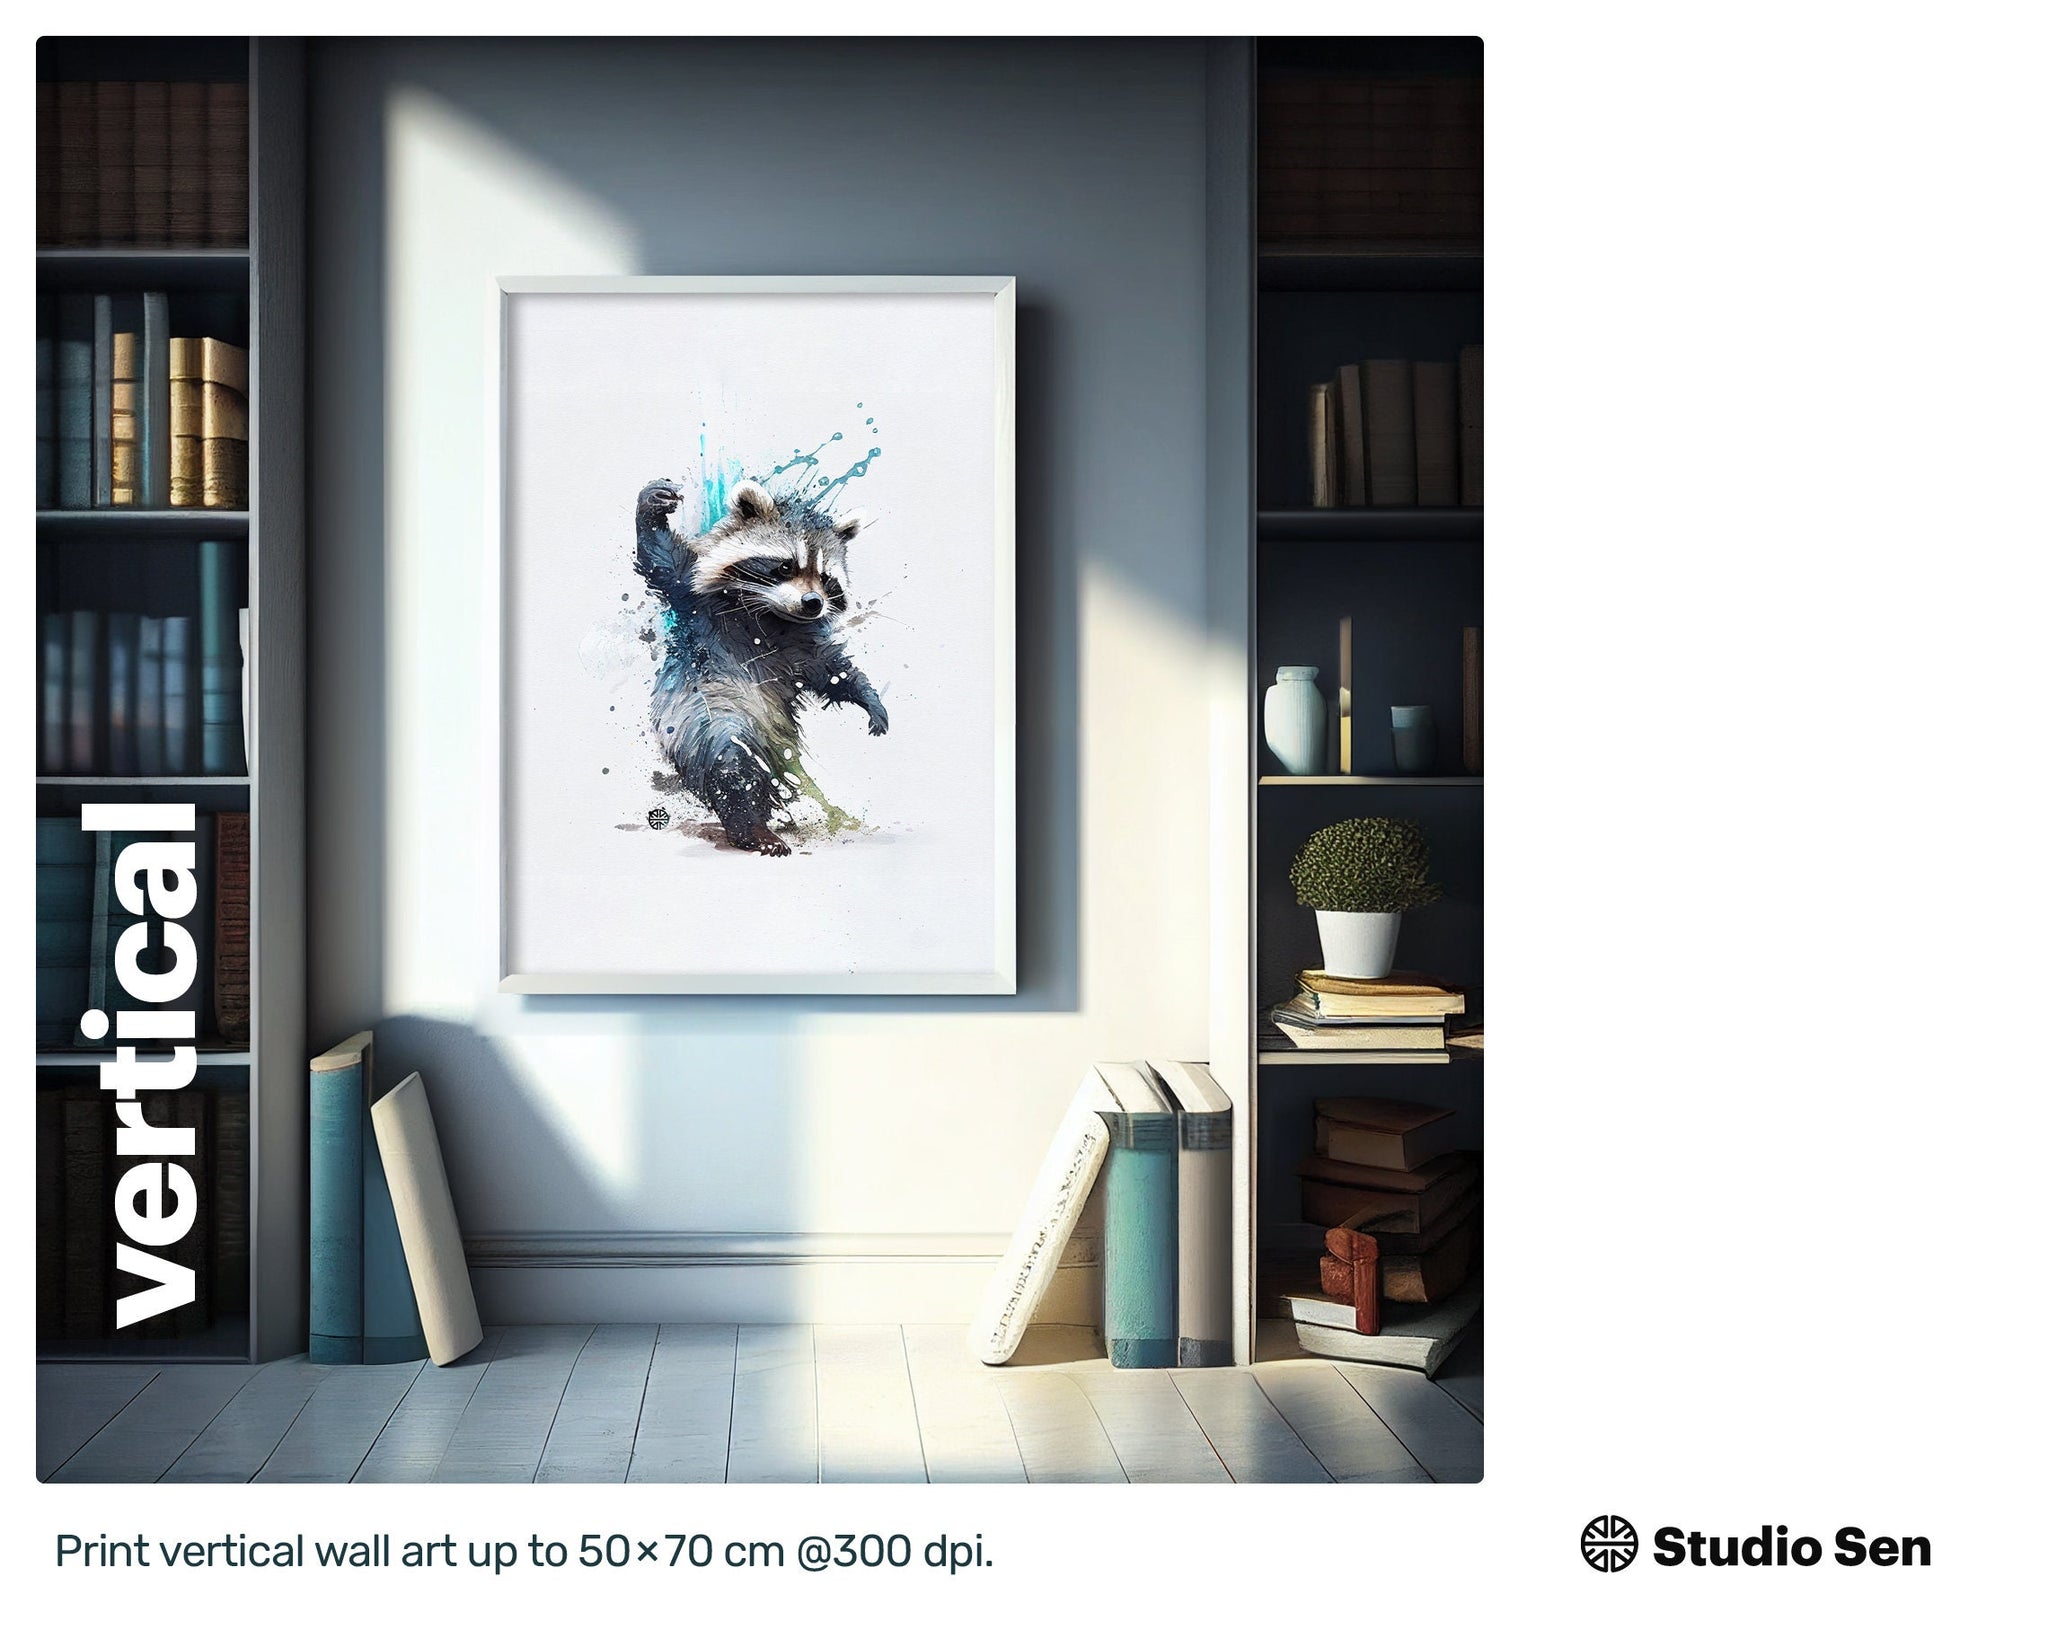 Curious Xclusive Racoon, Kind Adorable artwork, Admired Dynamic Funny Zesty Glitzy Canvas